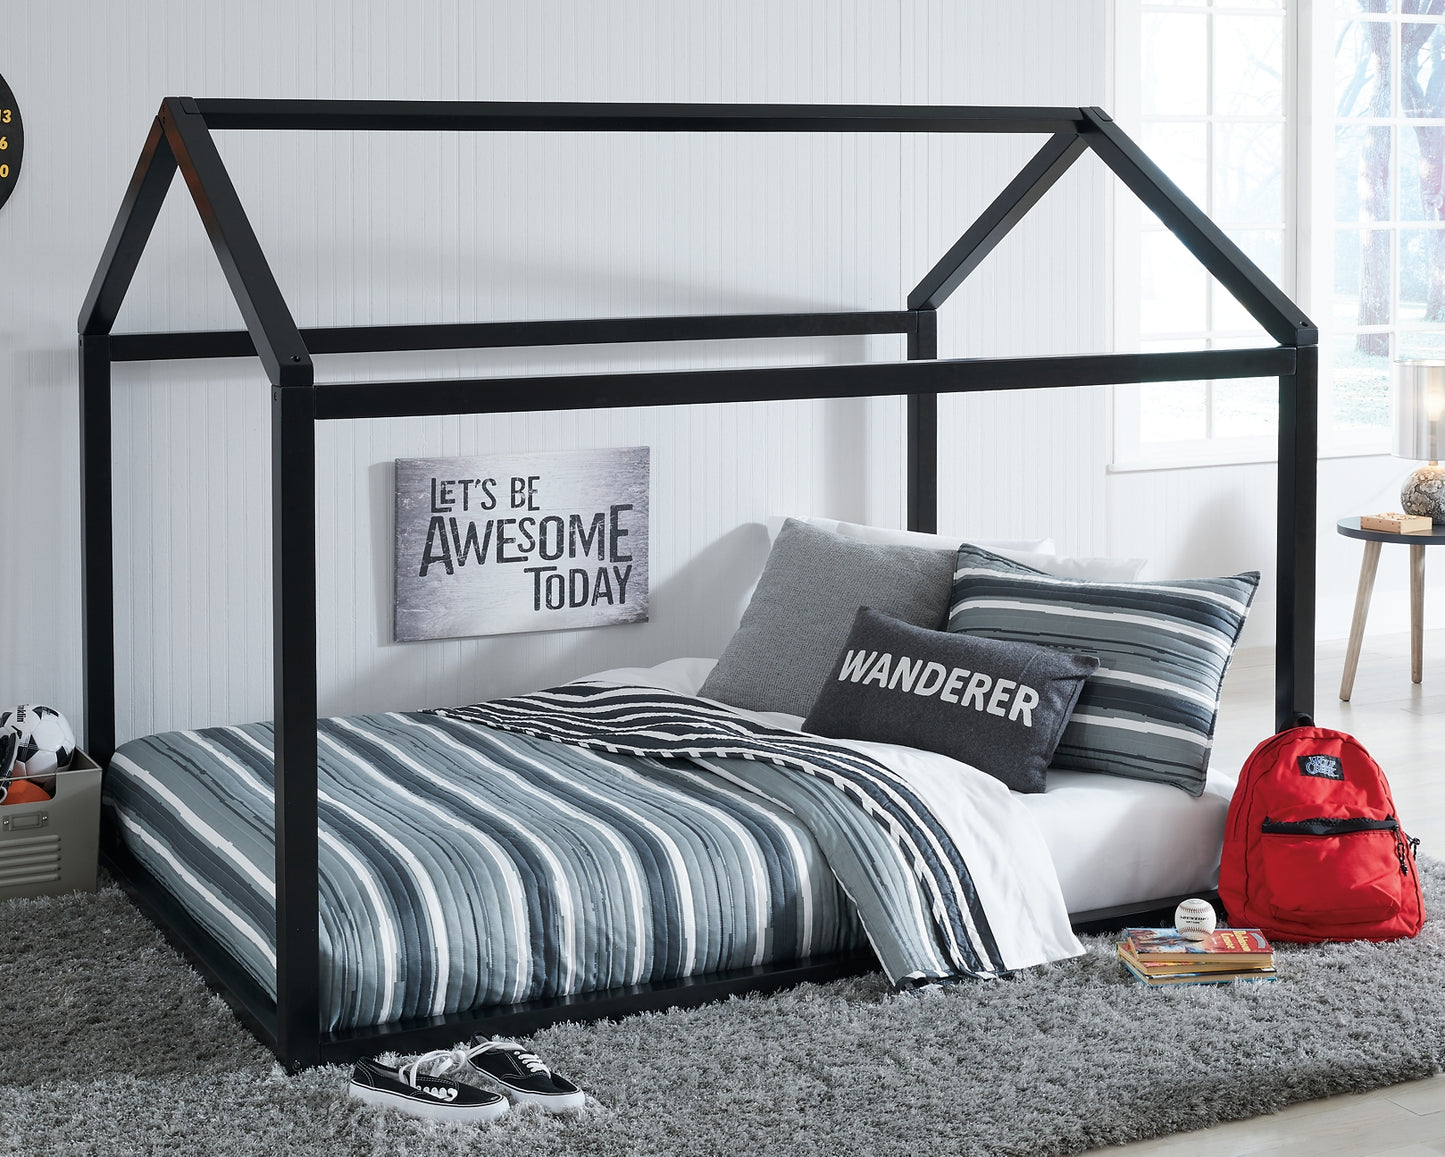 Ashley Express - Flannibrook  House Bed Frame